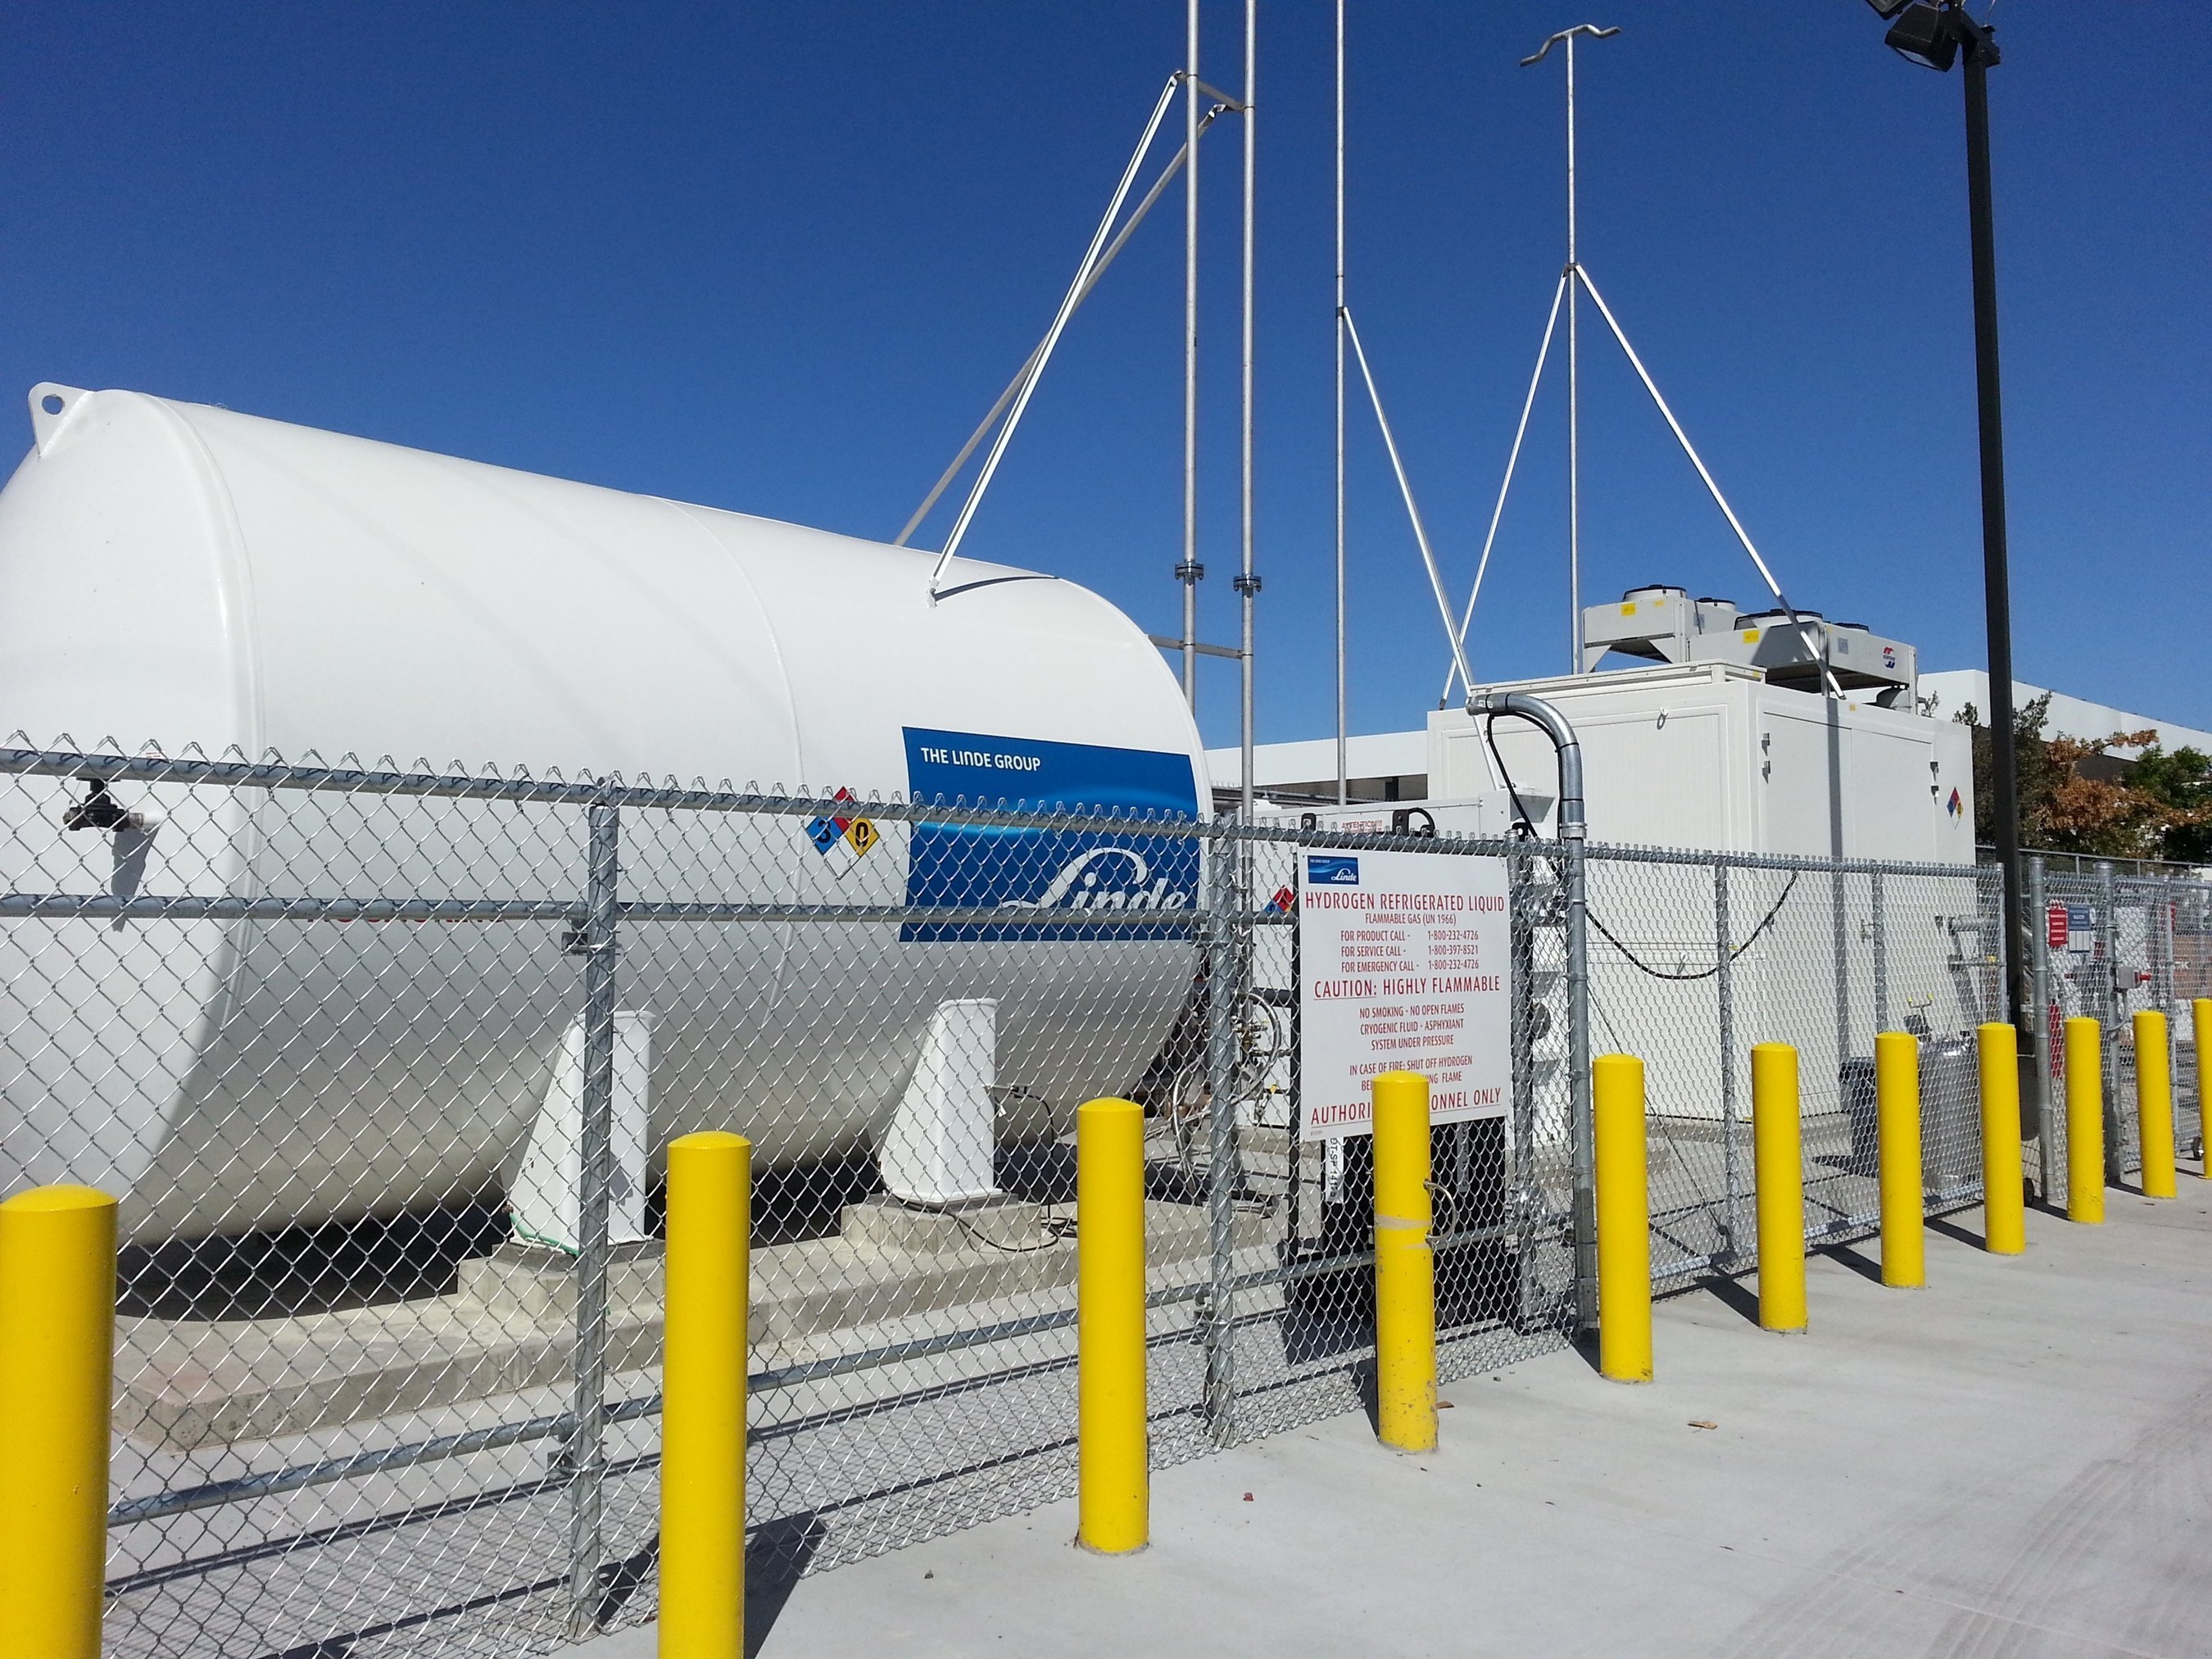 Linde tank supplying hydrogen to the Linde station at the Ramos Oil Company multi-fuel station in West Sacramento, California. (PRNewsFoto/Linde North America)